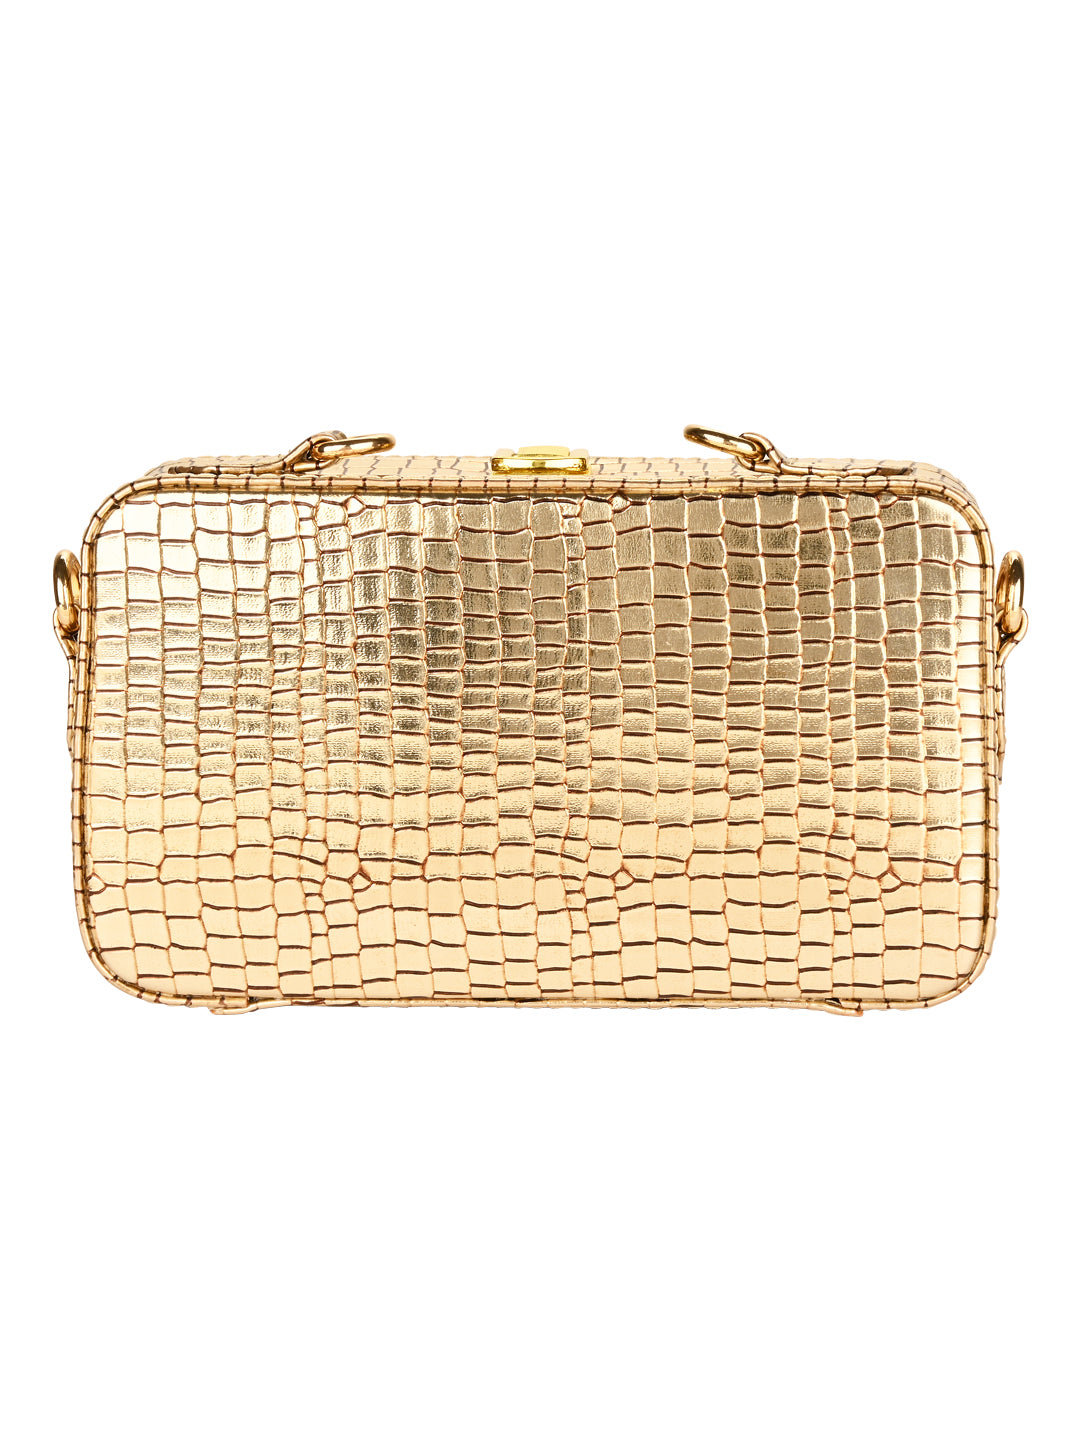 With its radiant gold hue and versatile design, this bag adds a dose of opulence to any outfit.